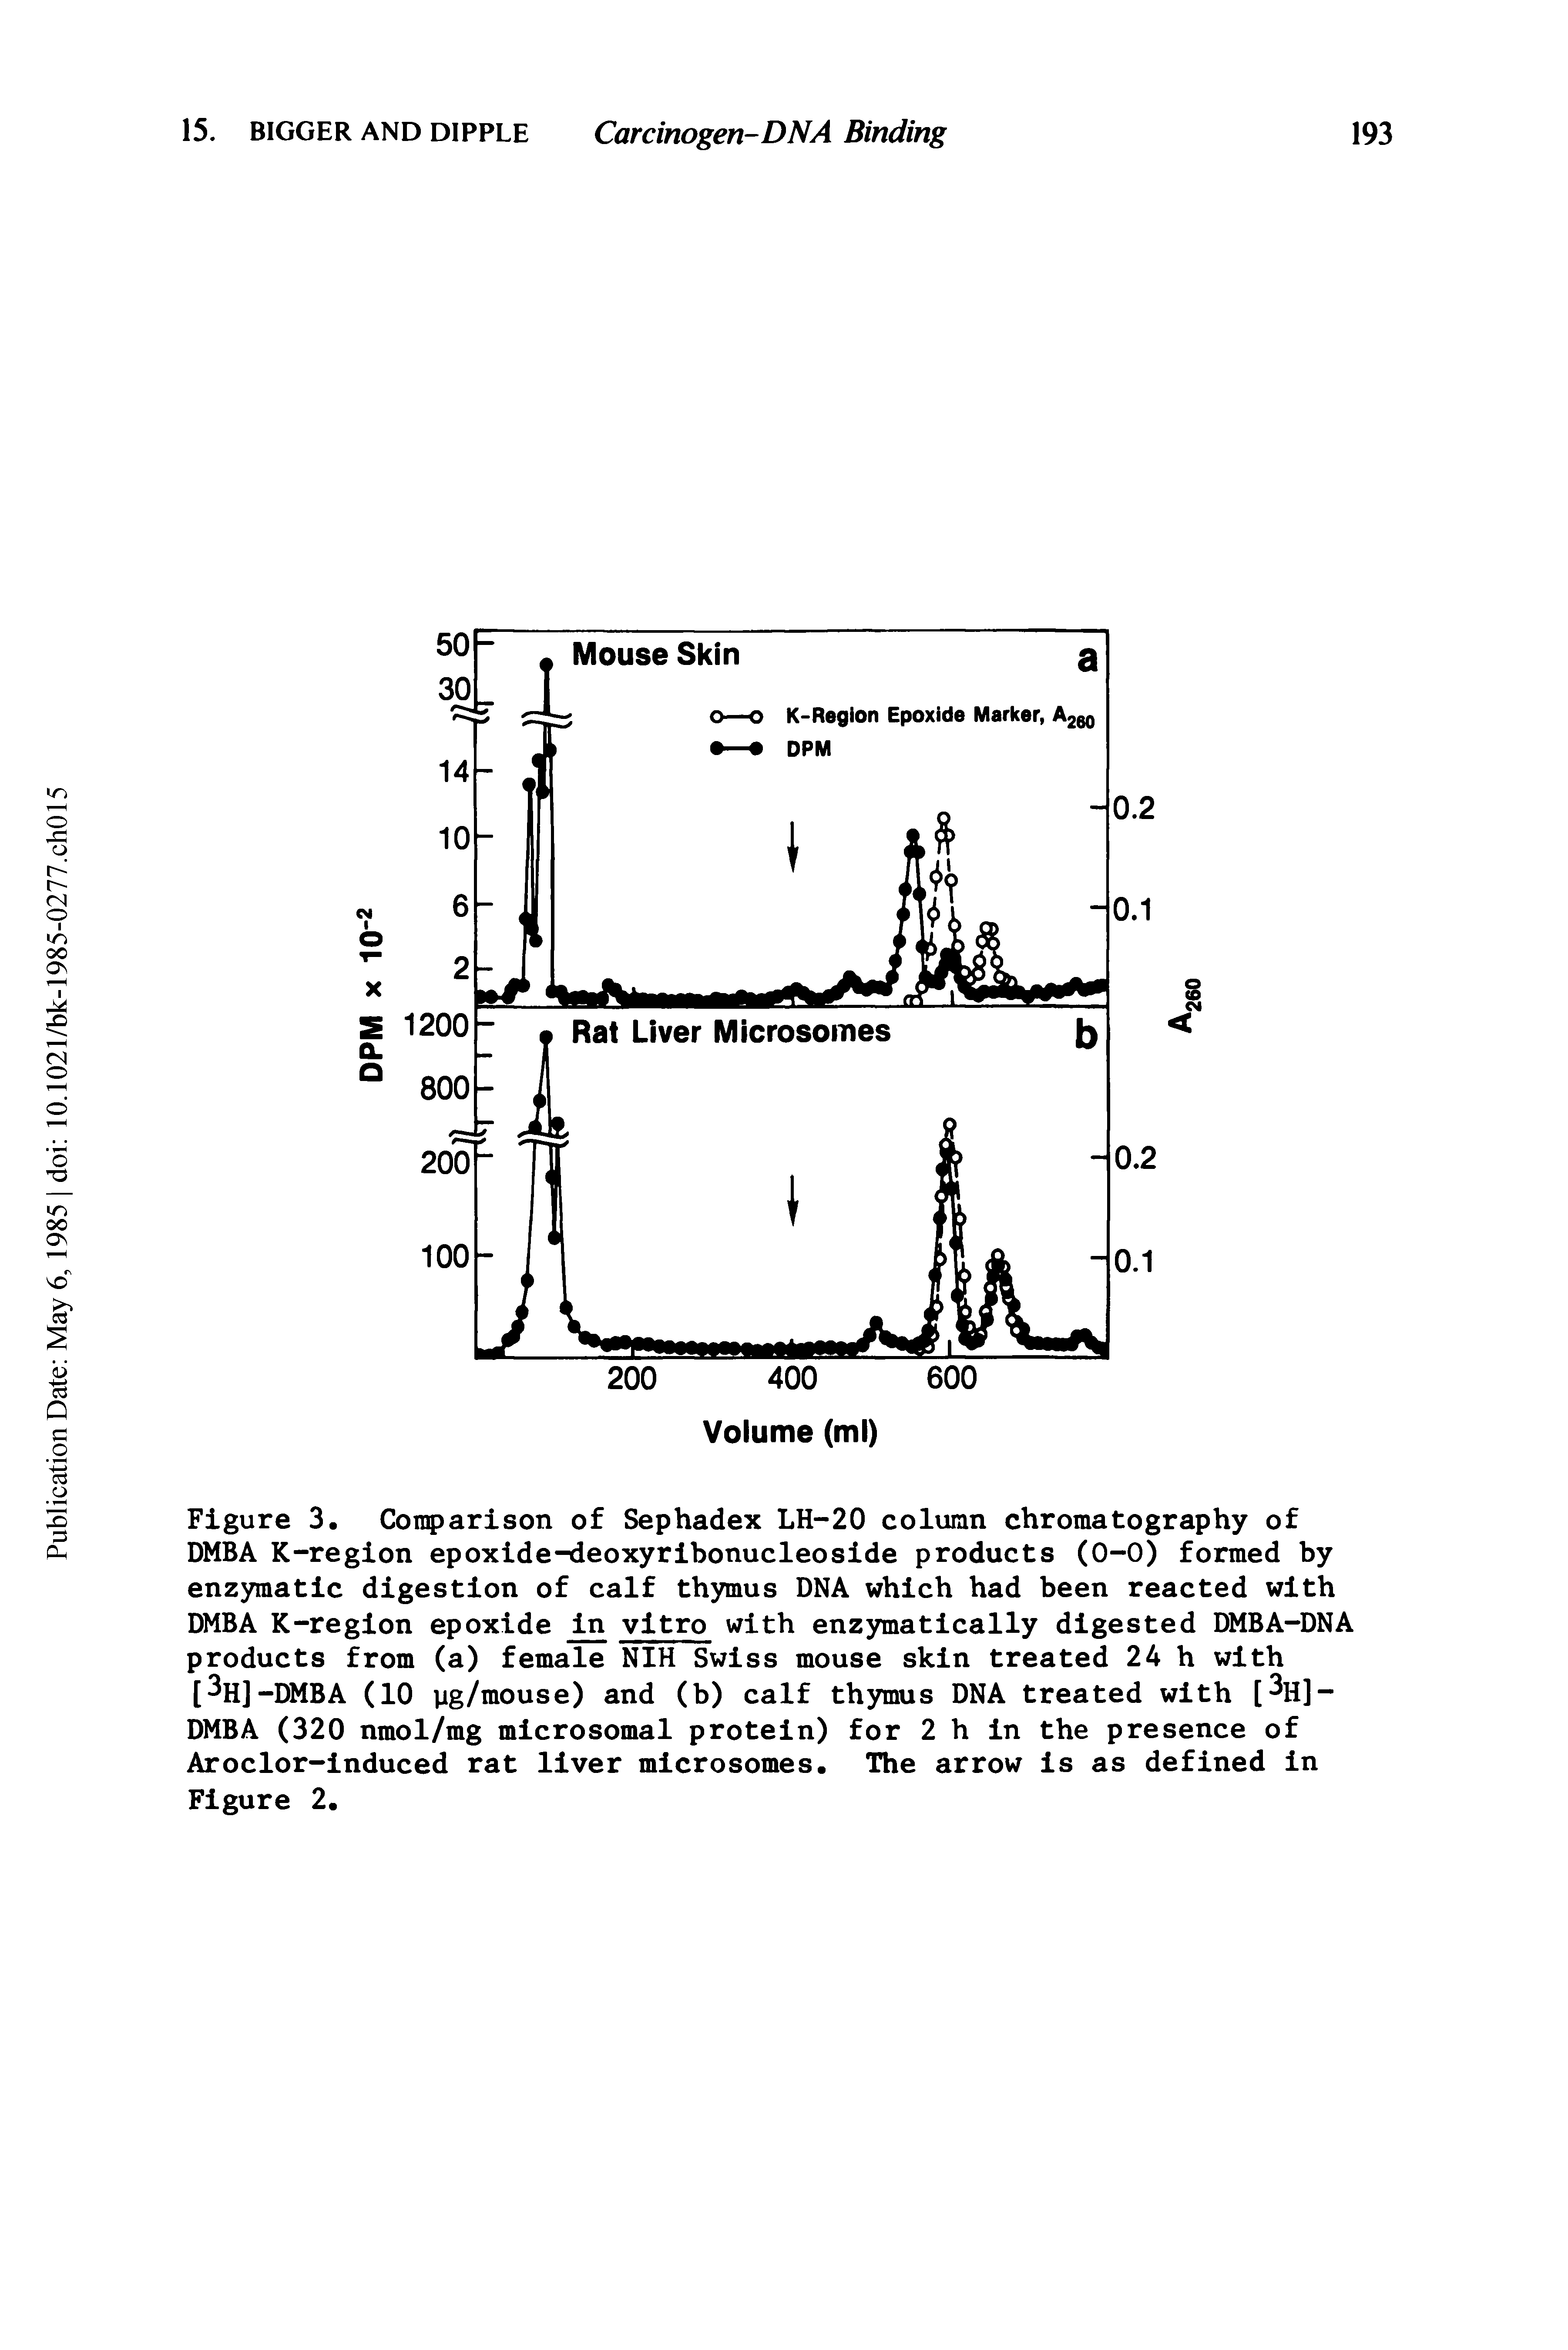 Figure 3. Comparison of Sephadex LH-20 column chromatography of DMBA K-region epoxide deoxyribonucleoside products (0-0) formed by enzymatic digestion of calf thymus DNA which had been reacted with DMBA K-region epoxide jji vitro with enzymatically digested DMBA-DNA products from (a) female NIH Swiss mouse skin treated 24 h with [3h]-DMBA (10 yg/mouse) and (b) calf thymus DNA treated with [ H]-DMBA (320 nmol/mg microsomal protein) for 2 h in the presence of Aroclor-induced rat liver microsomes. The arrow is as defined in Figure 2.